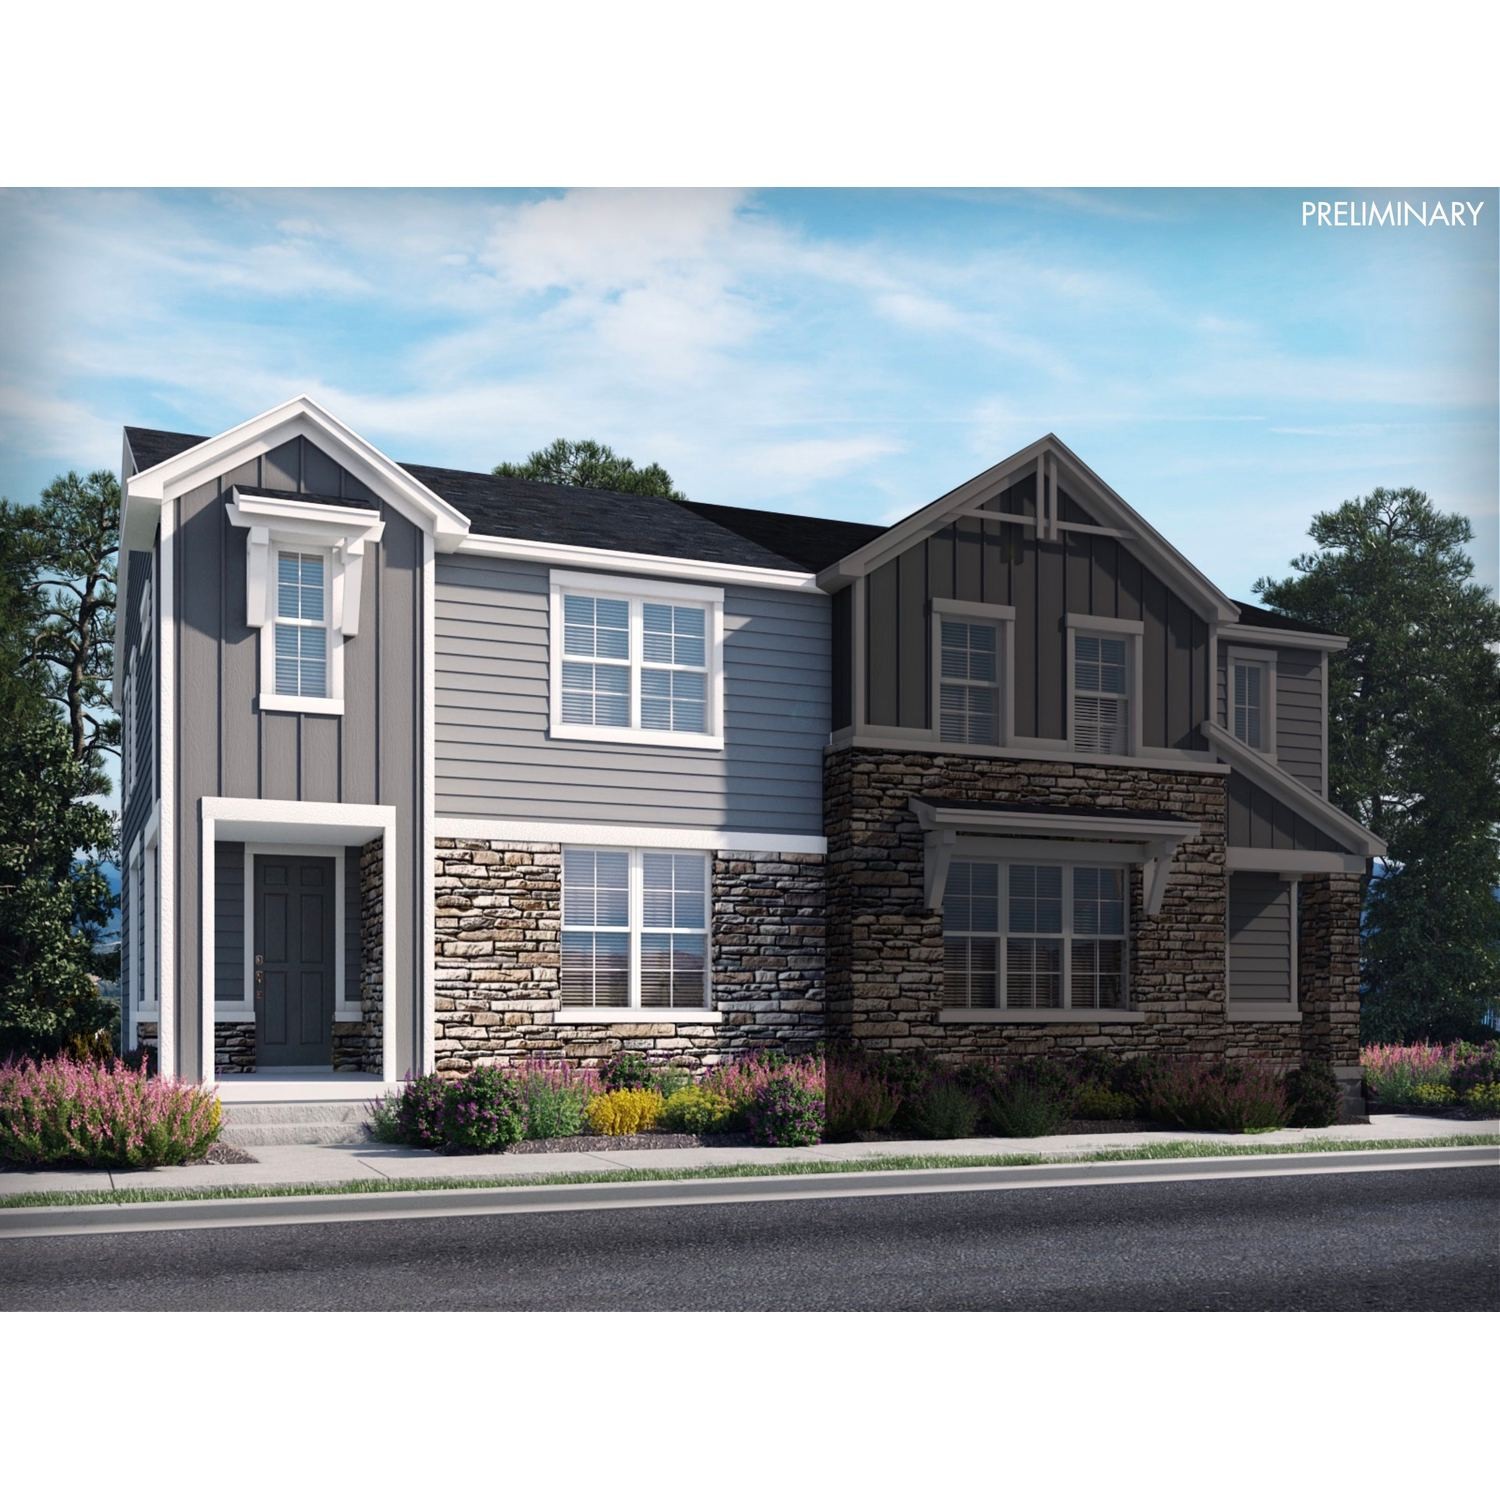 3. Prospect Village At Sterling Ranch: Paired Homes